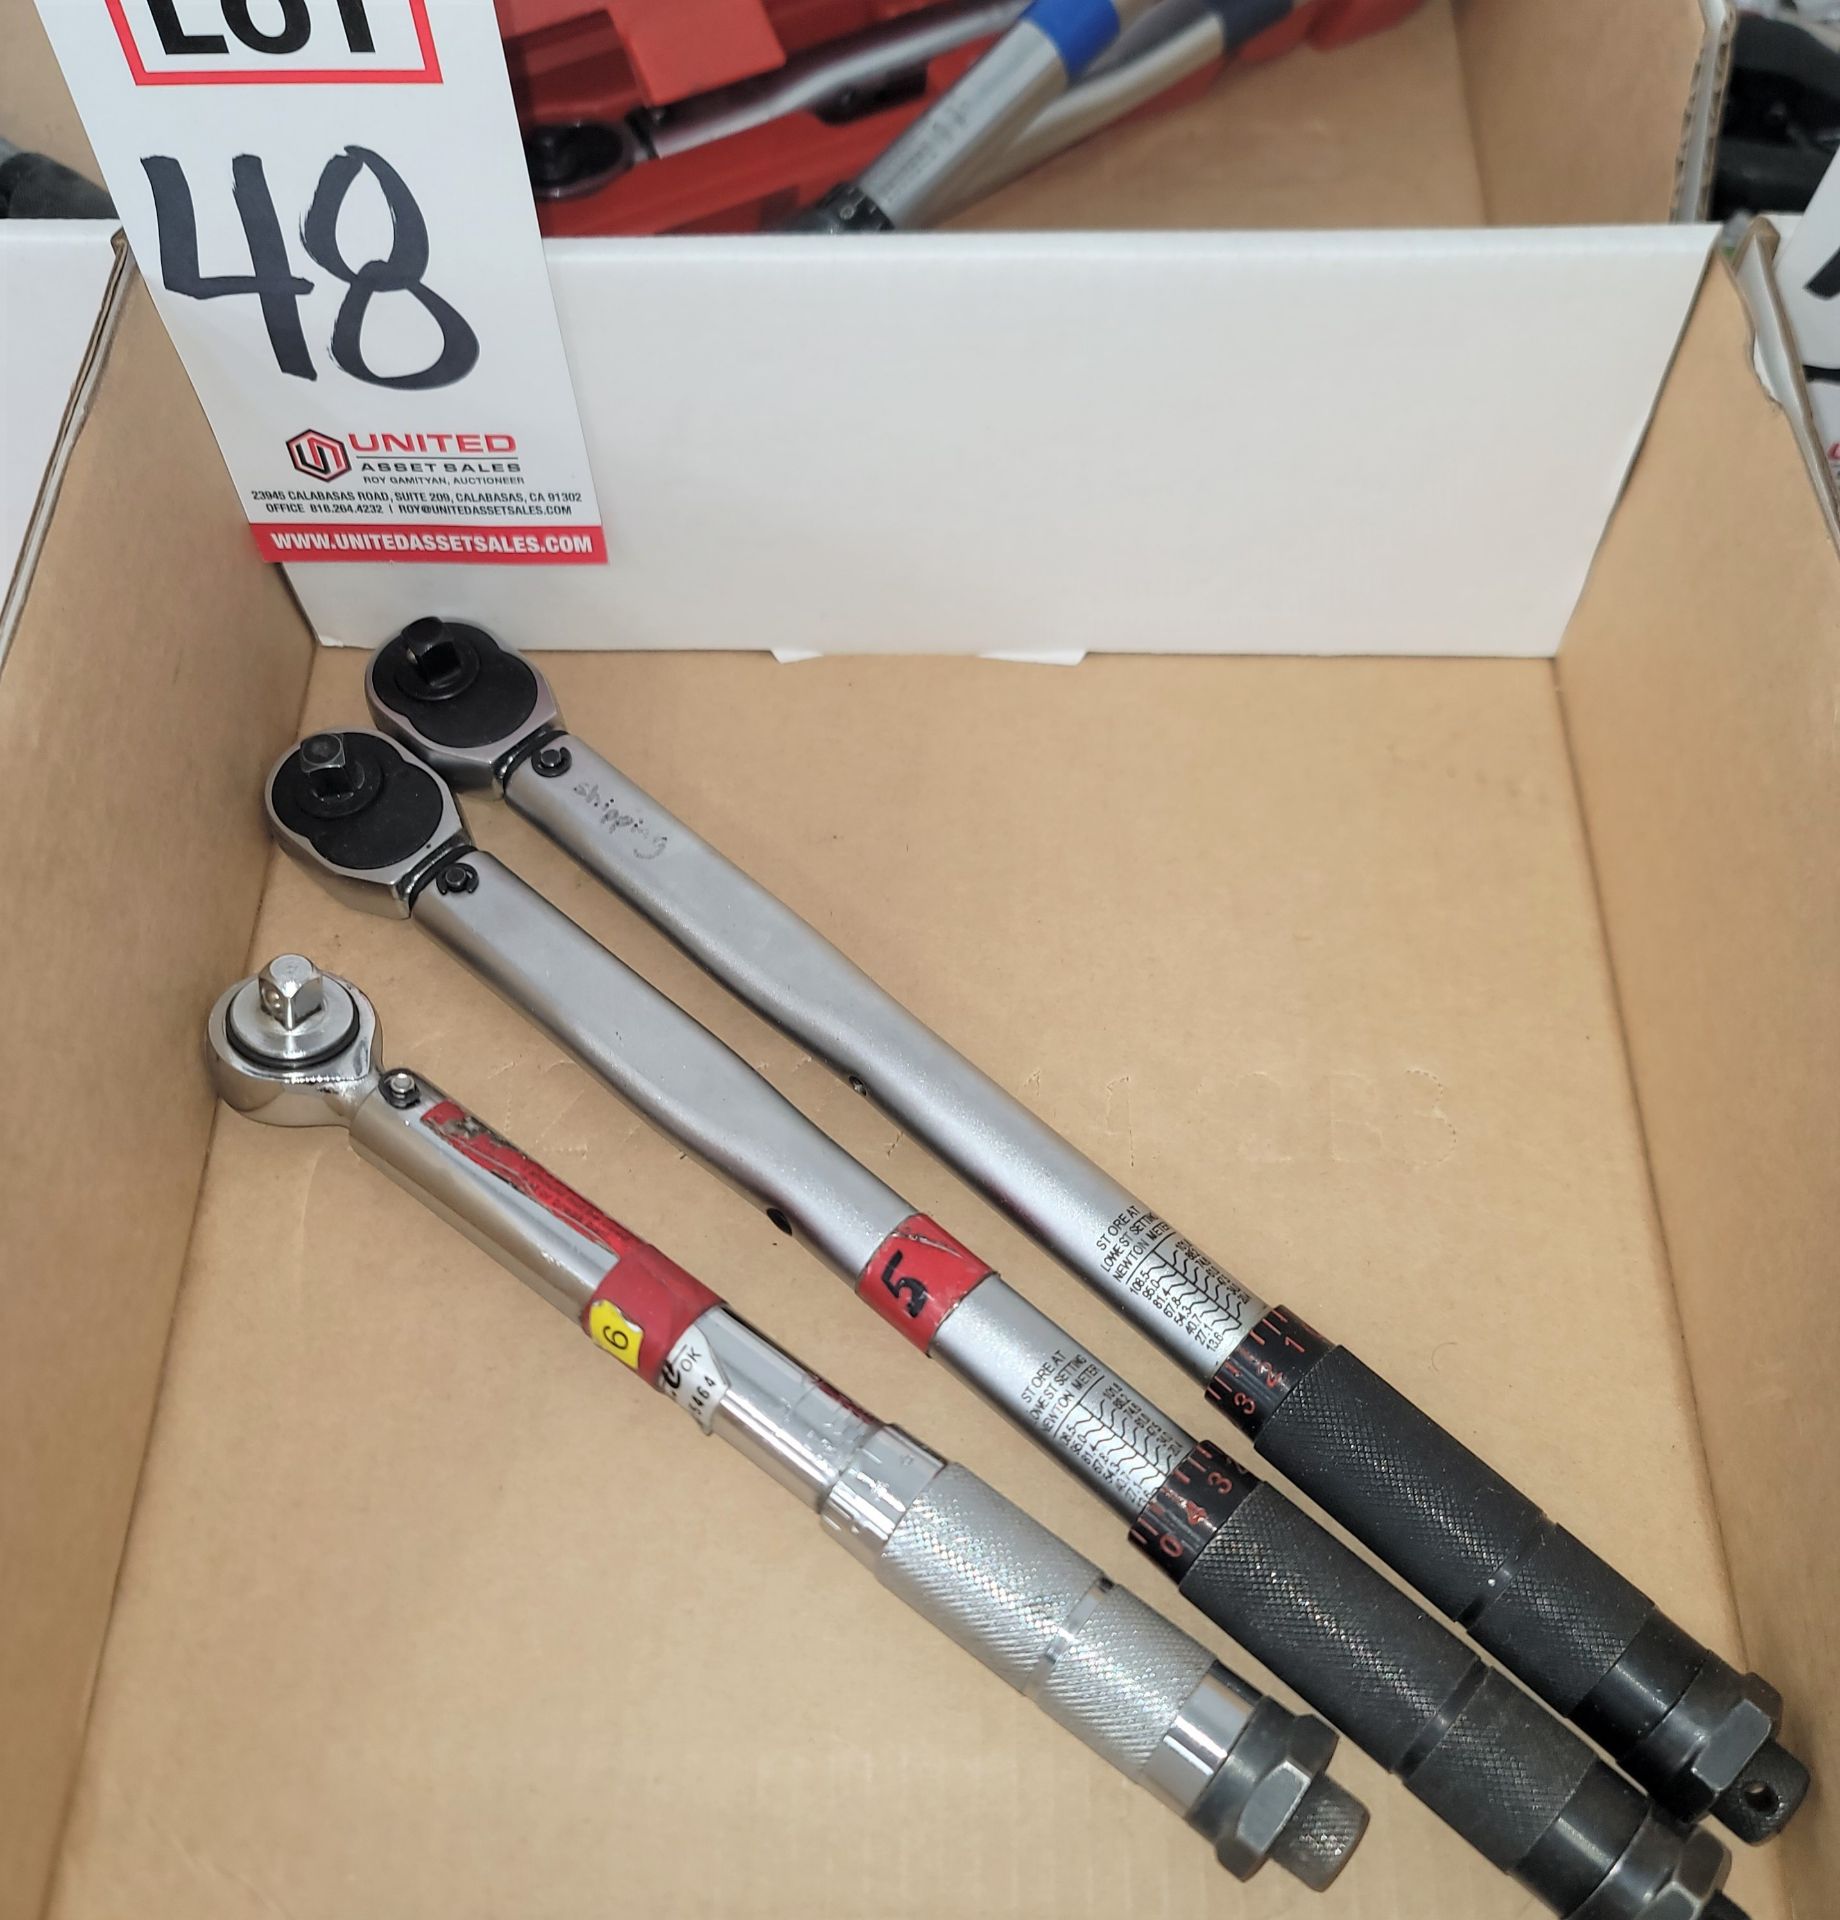 LOT - (3) 3/8" DRIVE TORQUE WRENCHES, GREATNECK & TACKLIFE BRANDS